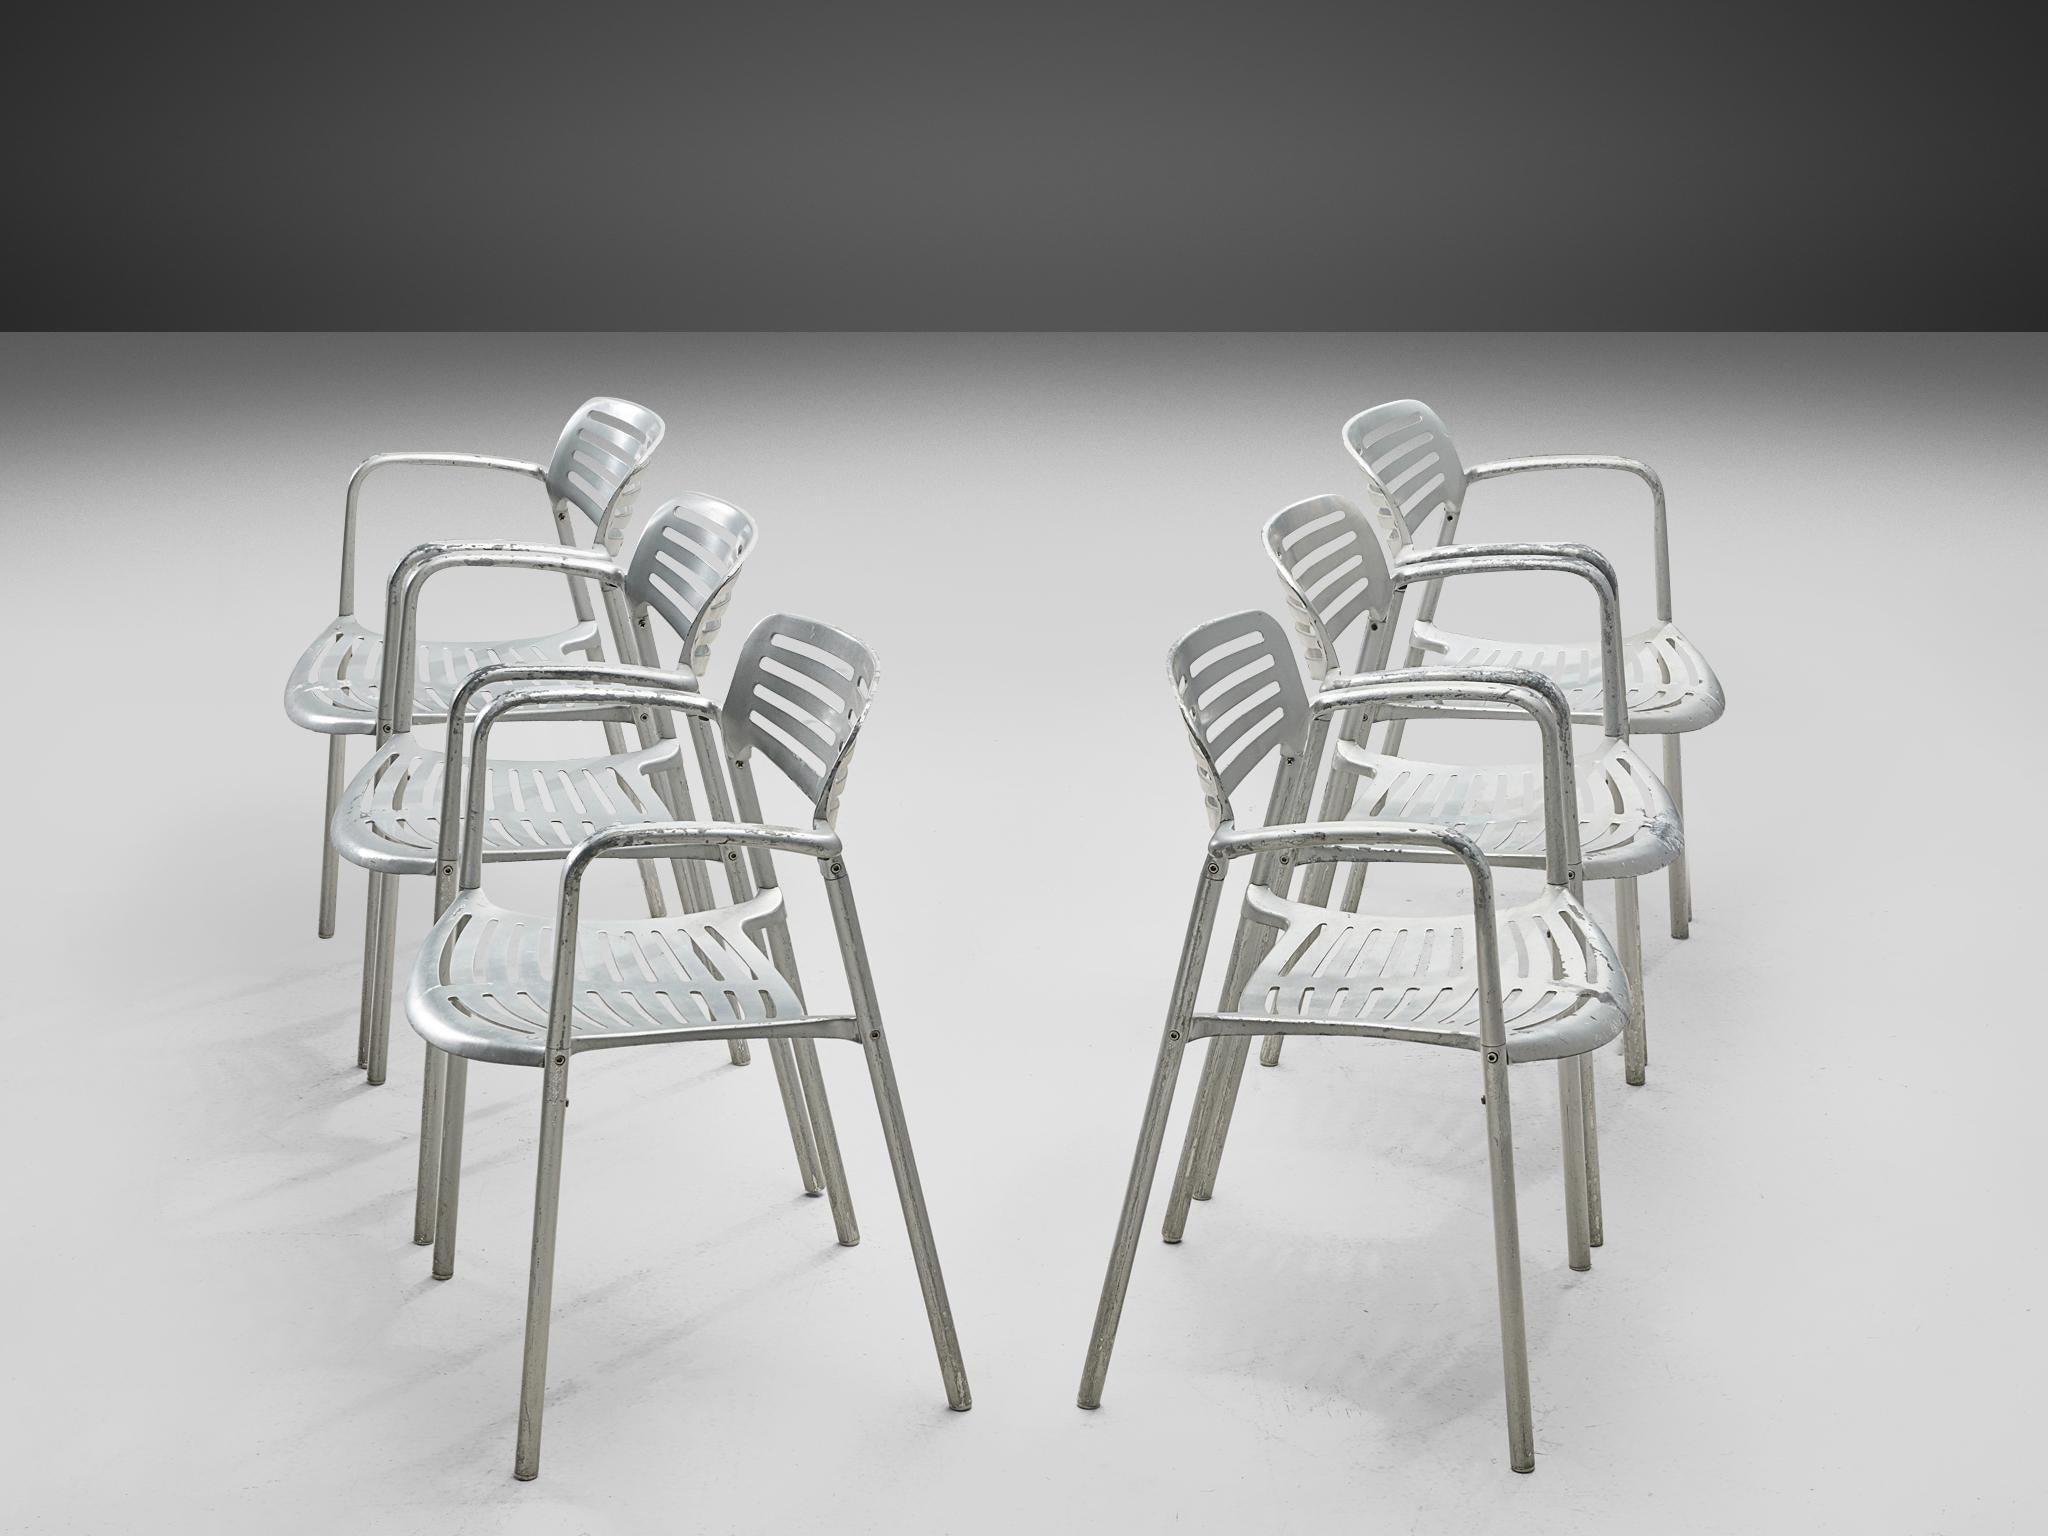 Jorge Pensi, set of armchairs, aluminum, Spain, 1988

A set of Jorge Spensi's aluminum chairs of the Toledo collection. Pensi designed the 'Toledo' chairs and the 'Toledo' table for the manufacturer Amat-3. Later the designs were adopted by Knoll